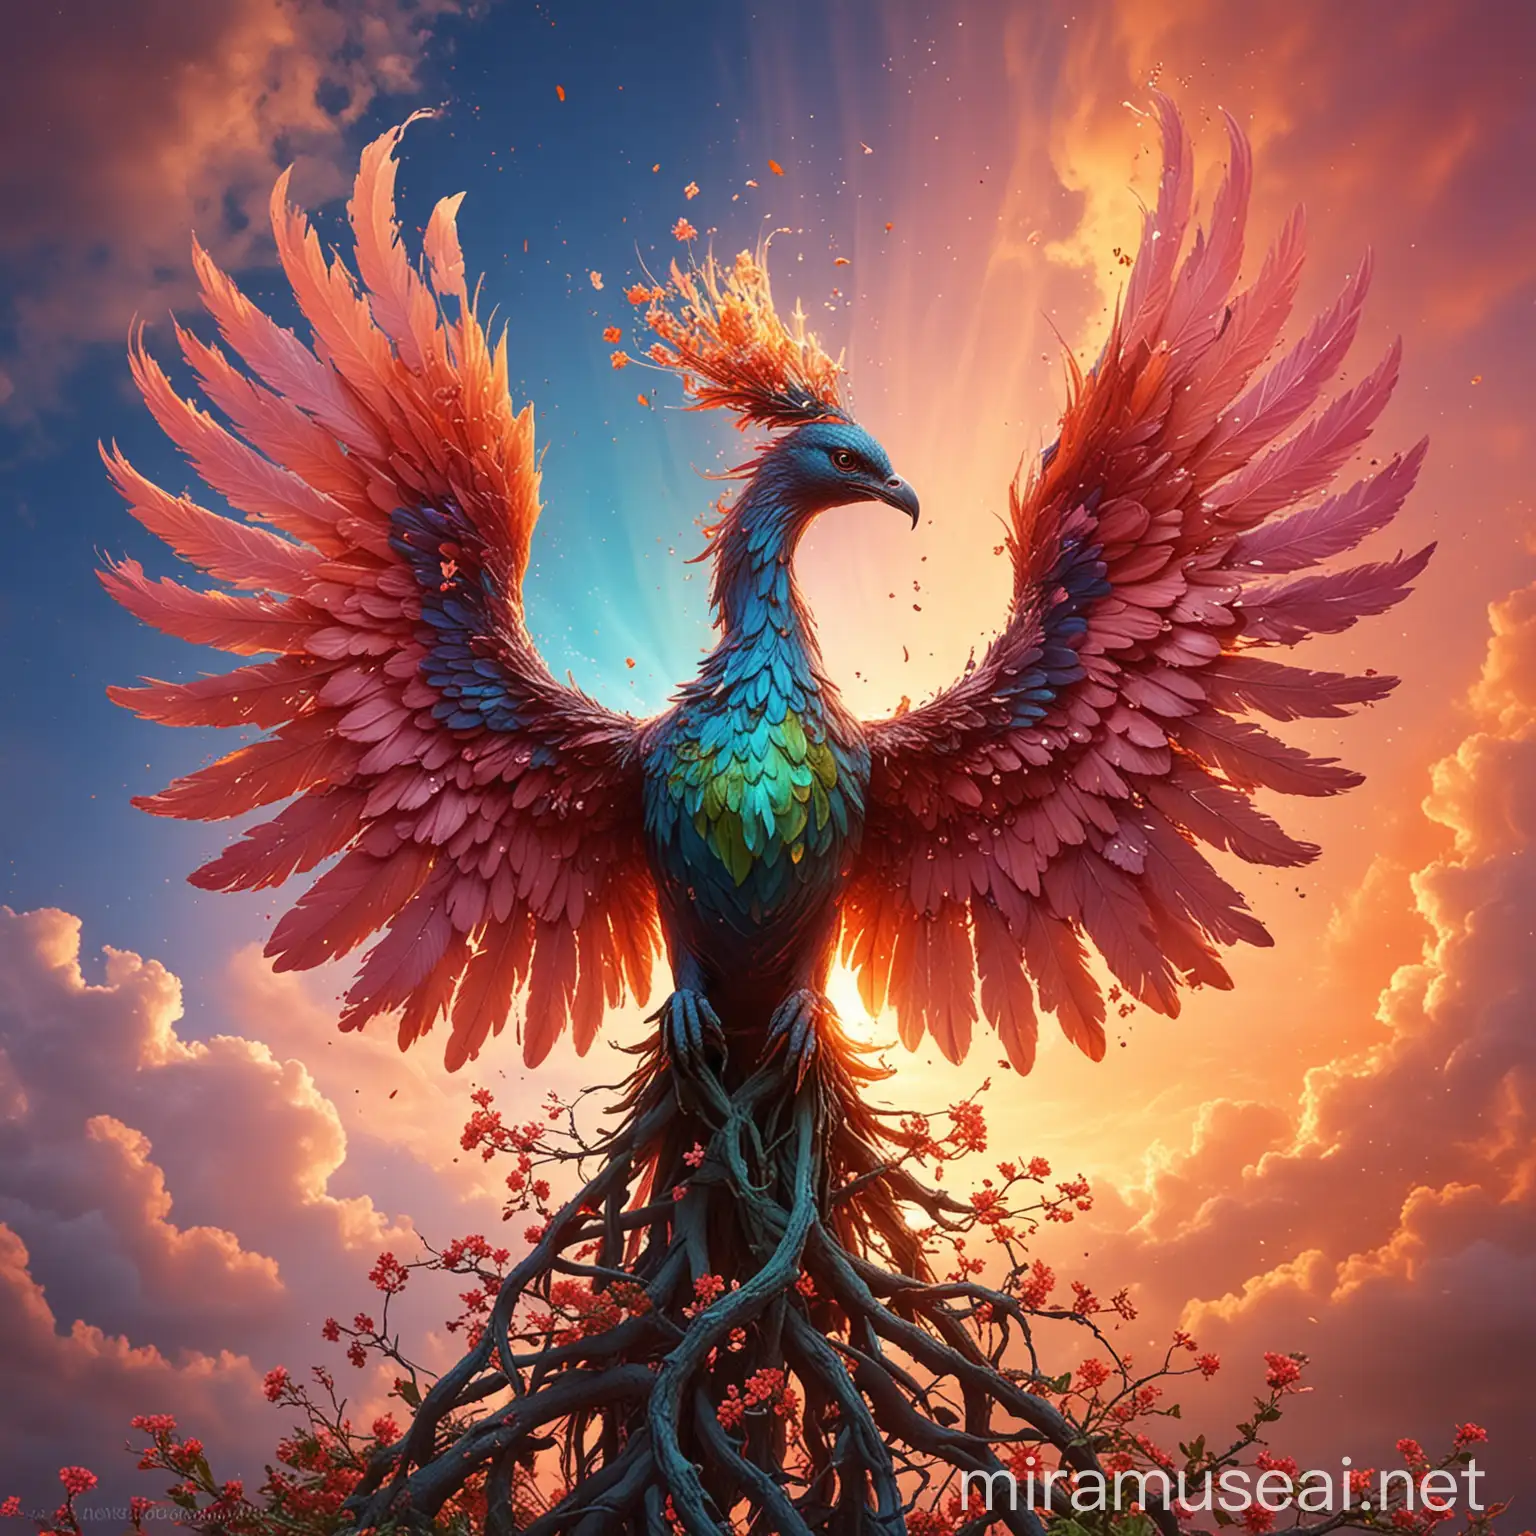 type: Phoenix_Blossom
name: "Phoenix Blossom: Transformation and Liberation"
description: |
    A beautiful and abstract image of a phoenix blooming from its ashes, undergoing a graceful transformation, symbolizing the journey of addiction recovery.
properties:
    - state: Flight
    - environment: Serene Nature
    - colors:
        Phoenix: "#FF4500"  # Vibrant Orange
        Sky: "#87CEEB"  # Tranquil Sky Blue
        Surroundings: "#008000"  # Lush Green
        Blossom: "#FF69B4"  # Delicate Hot Pink
        Recovery: "#4169E1"  # Royal Blue for Addiction Recovery Symbol
    - theme: Transformation and Liberation from Addiction
    - message: A symbol of hope and motivation, inspiring individuals to embark on a new path in life and break free from the chains of addiction.
    - social_supporters:
        - Phoenix: "Local Support Group for Addiction Recovery"
        - Sky: "Rehabilitation Center focused on Eco-Therapy"
        - Surroundings: "Community Outreach Program promoting Green Initiatives"
        - Blossom: "Holistic Therapist specializing in Addiction Counseling"